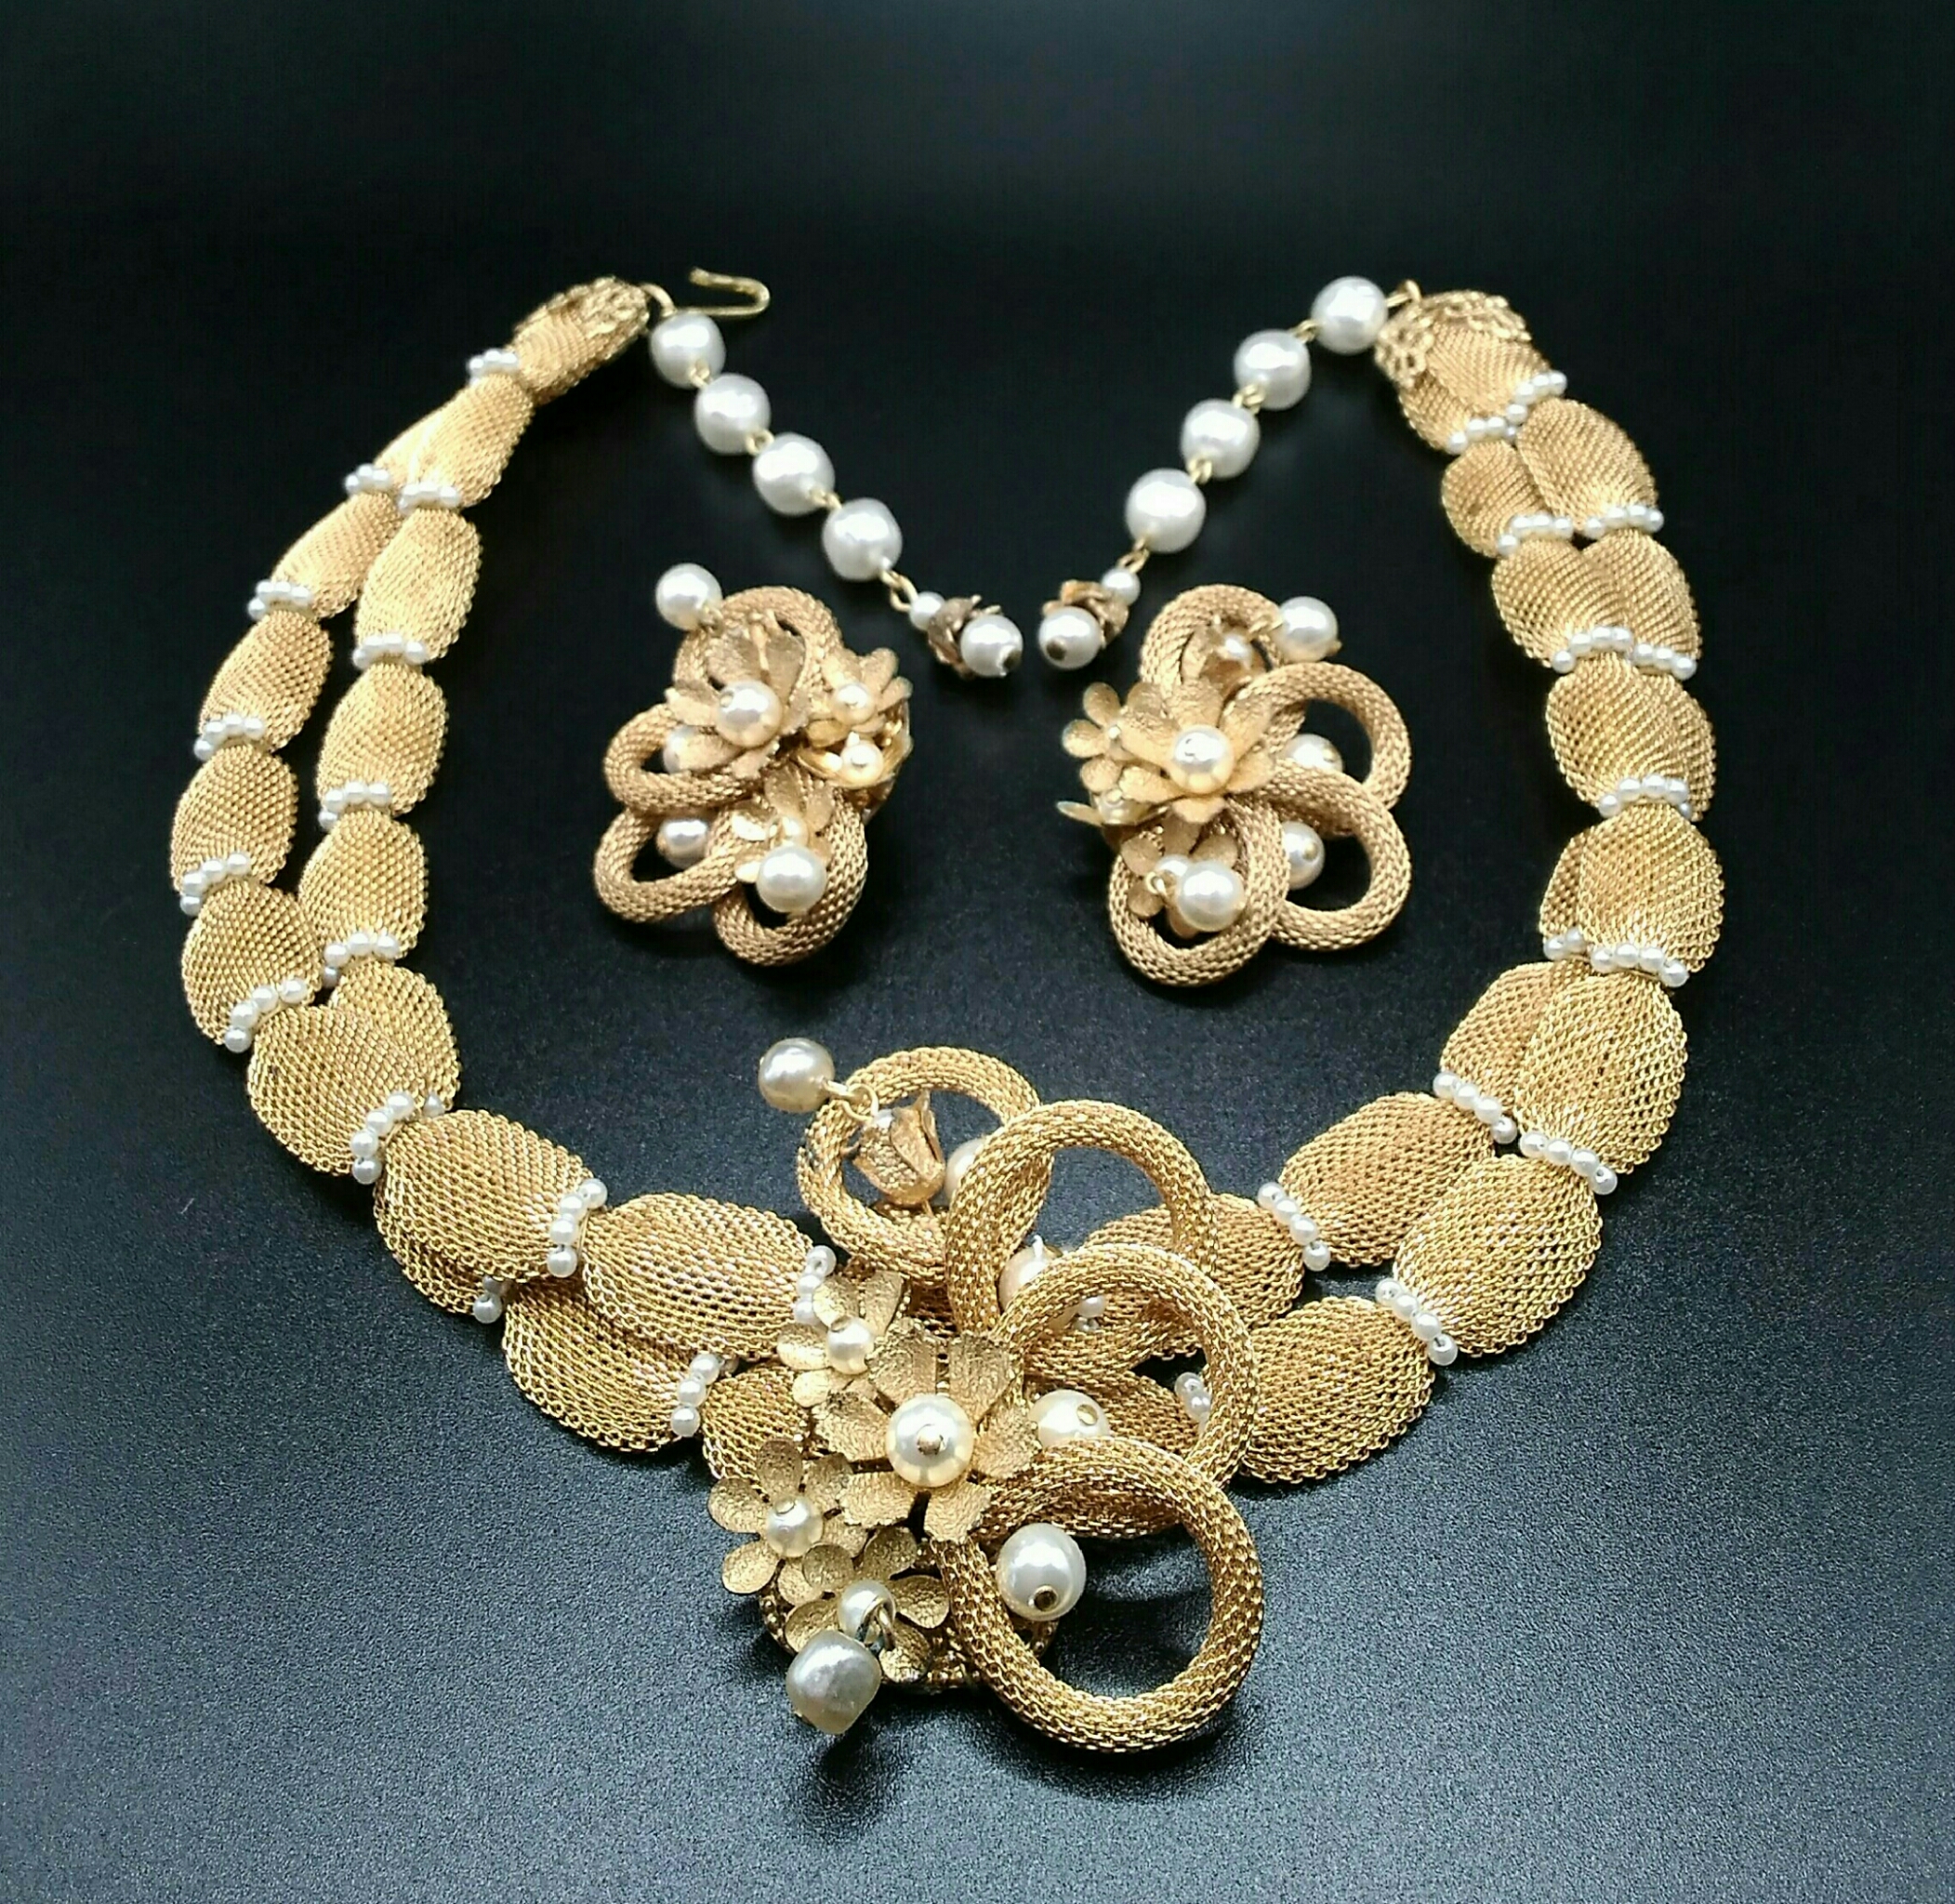 Vintage 1960's Gold Tone Mesh and Faux Pearl Jewelry Set